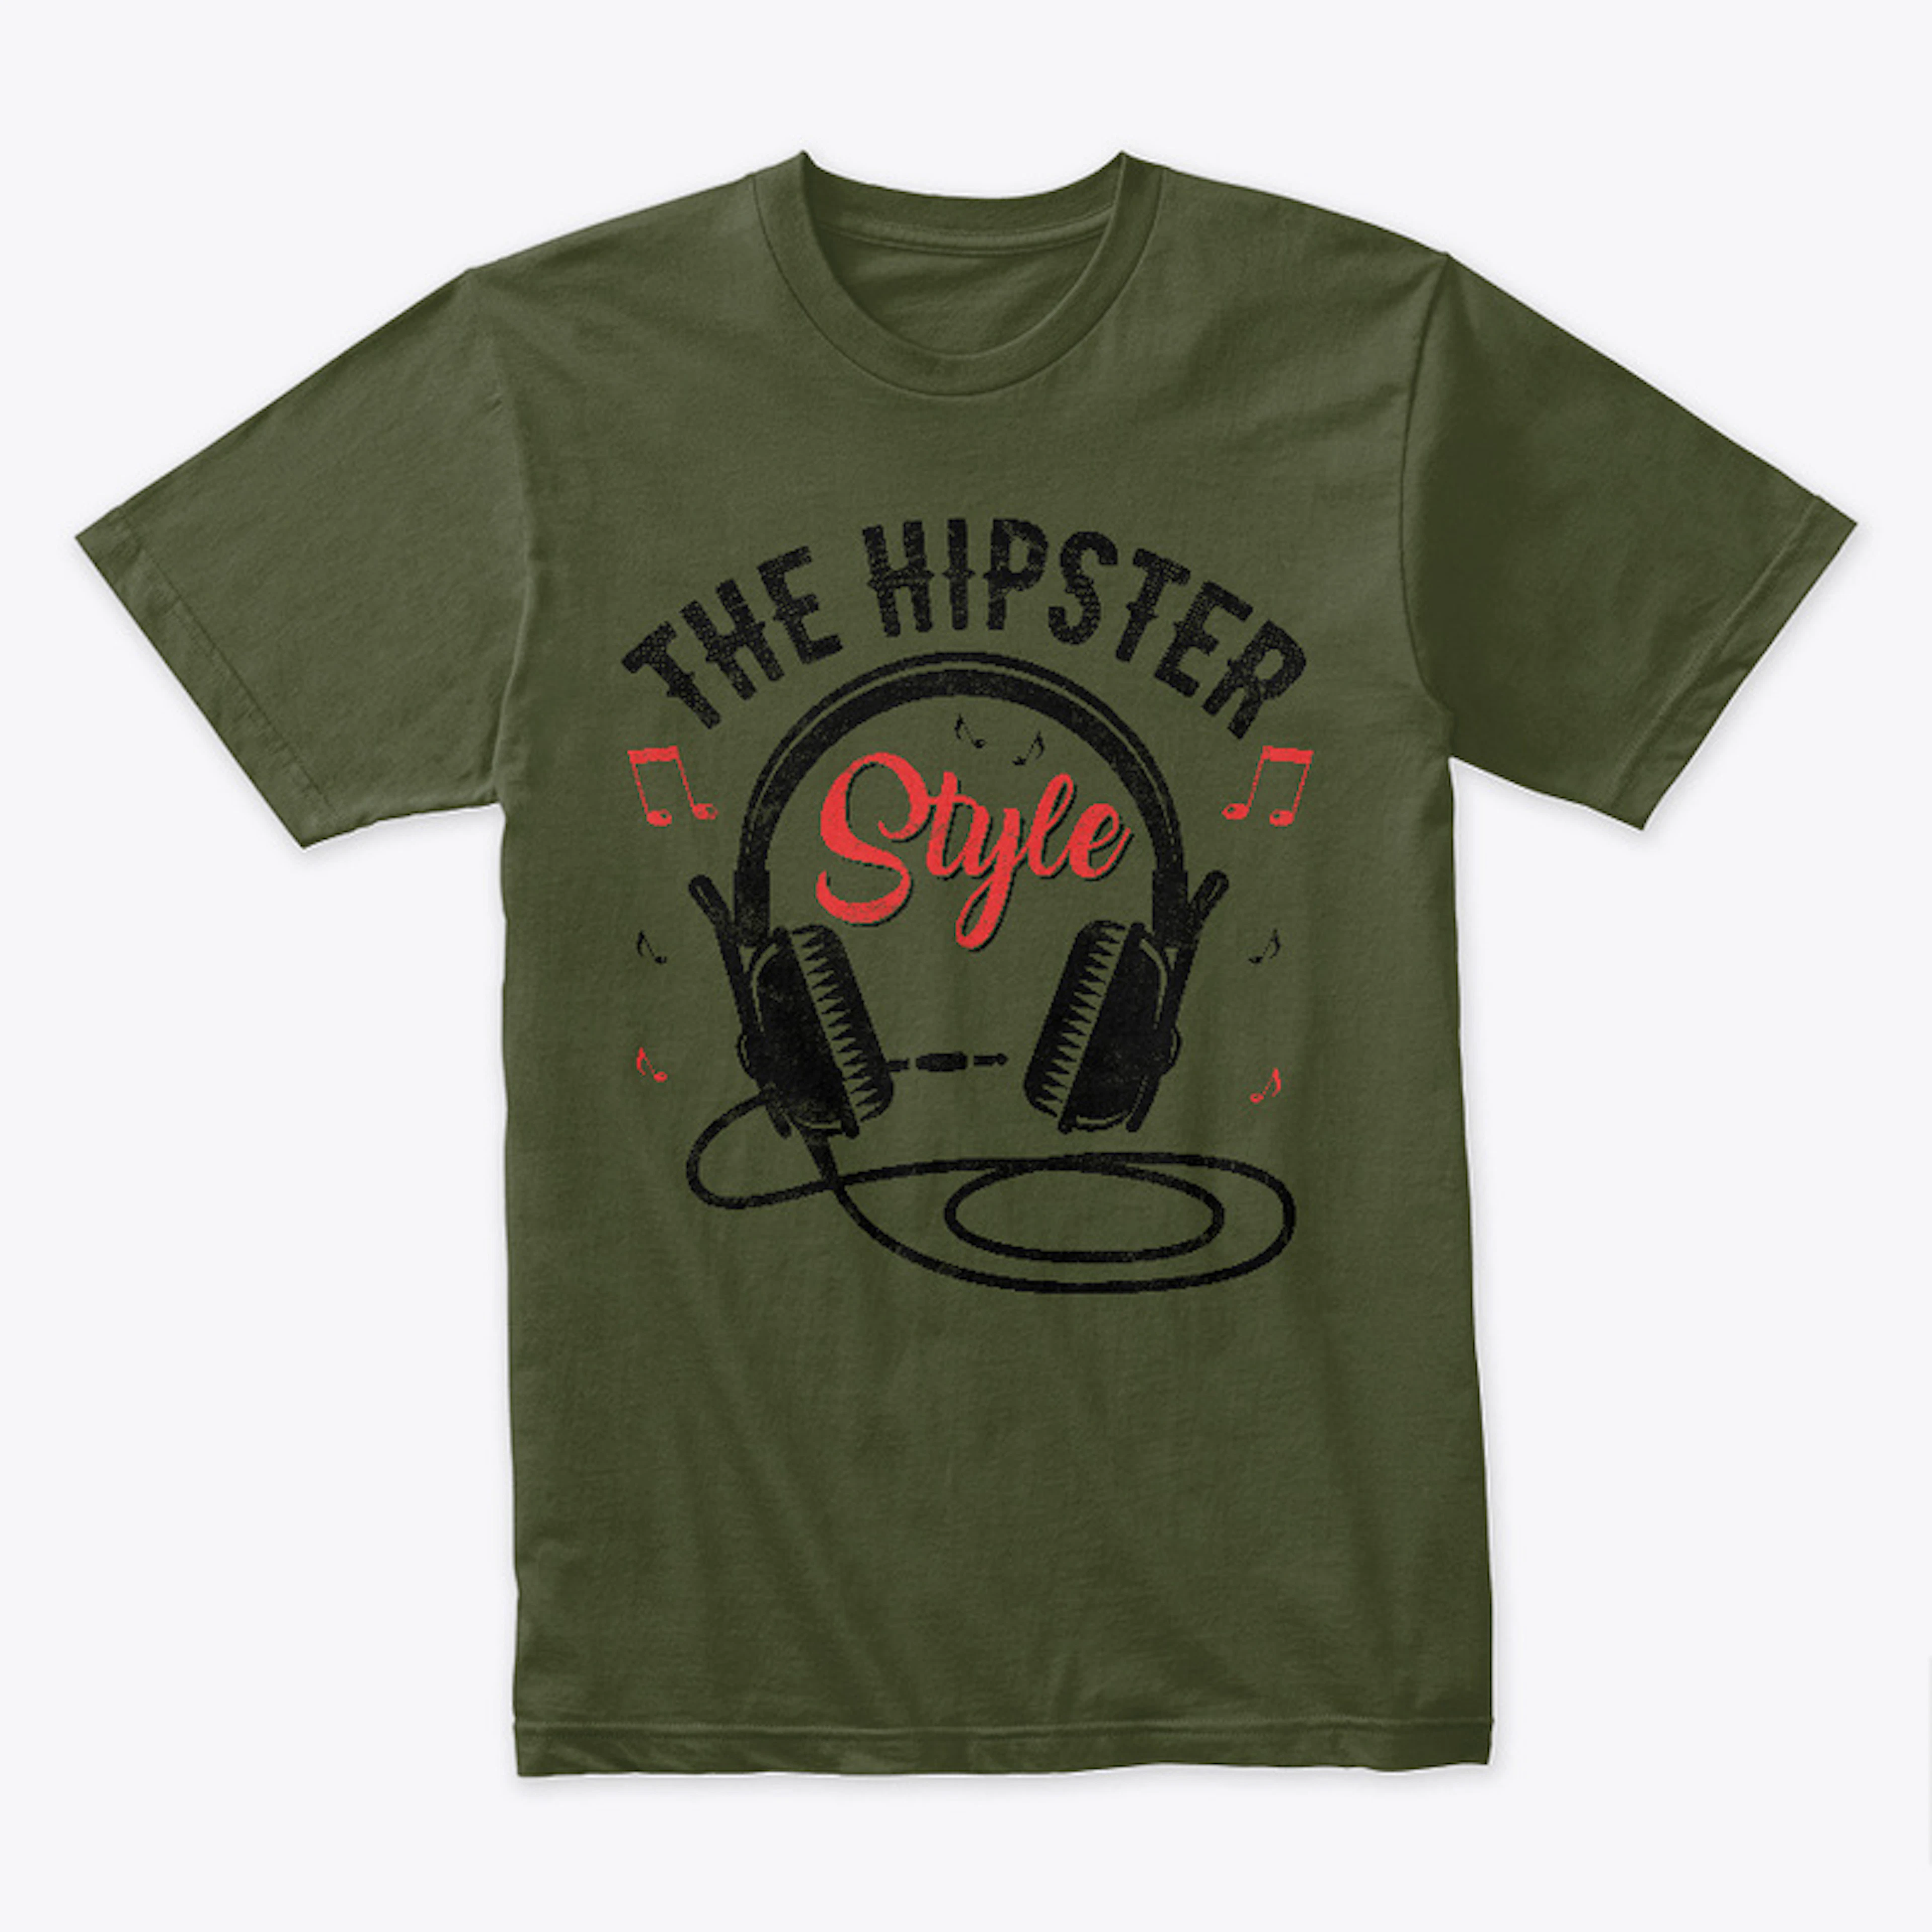 Men - The hipster style t-shirt